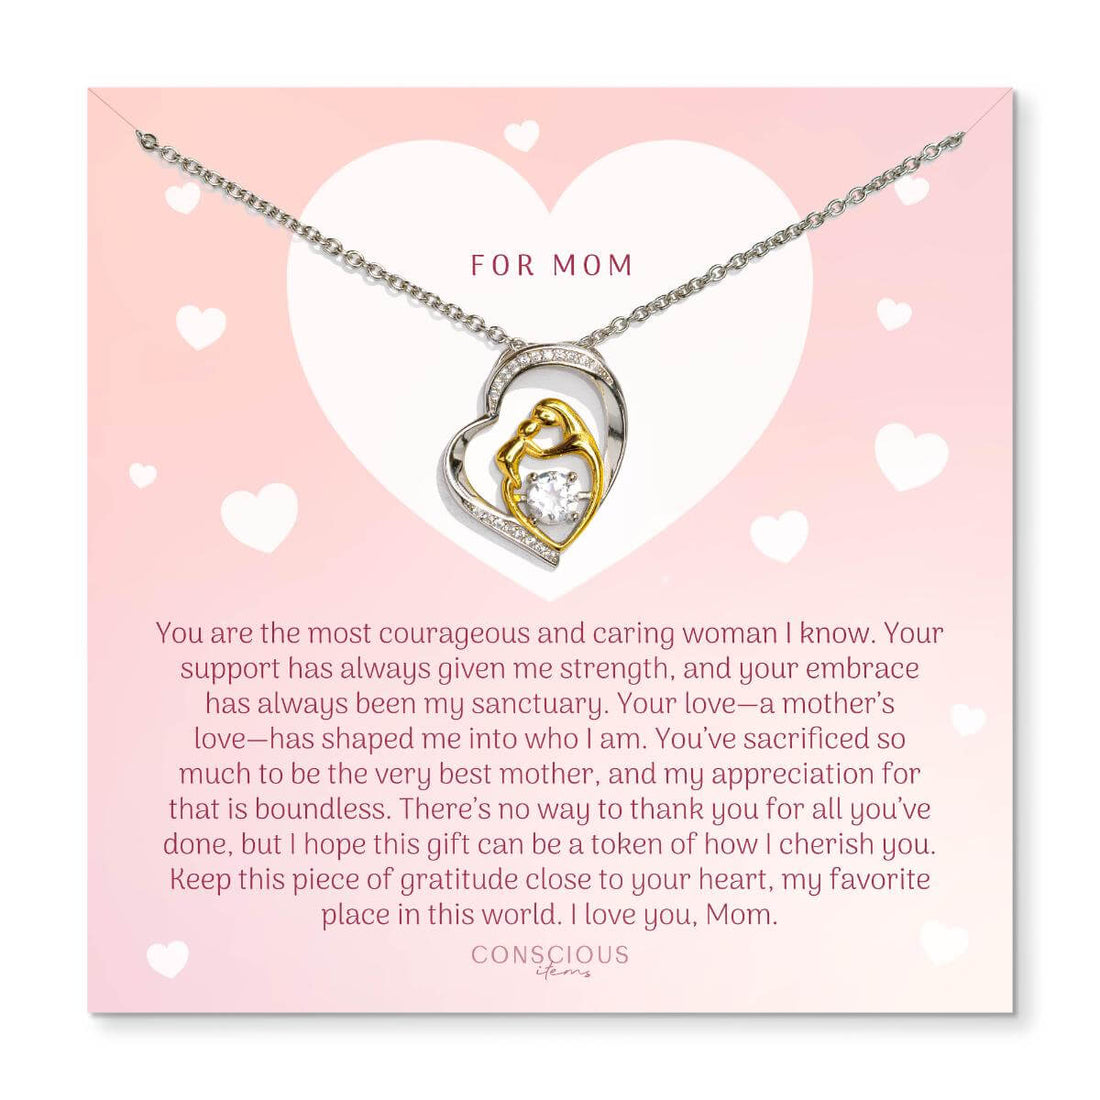 Unbreakable Bond - Mother &amp; Child Crystal Heart Pendant with Clear Quartz